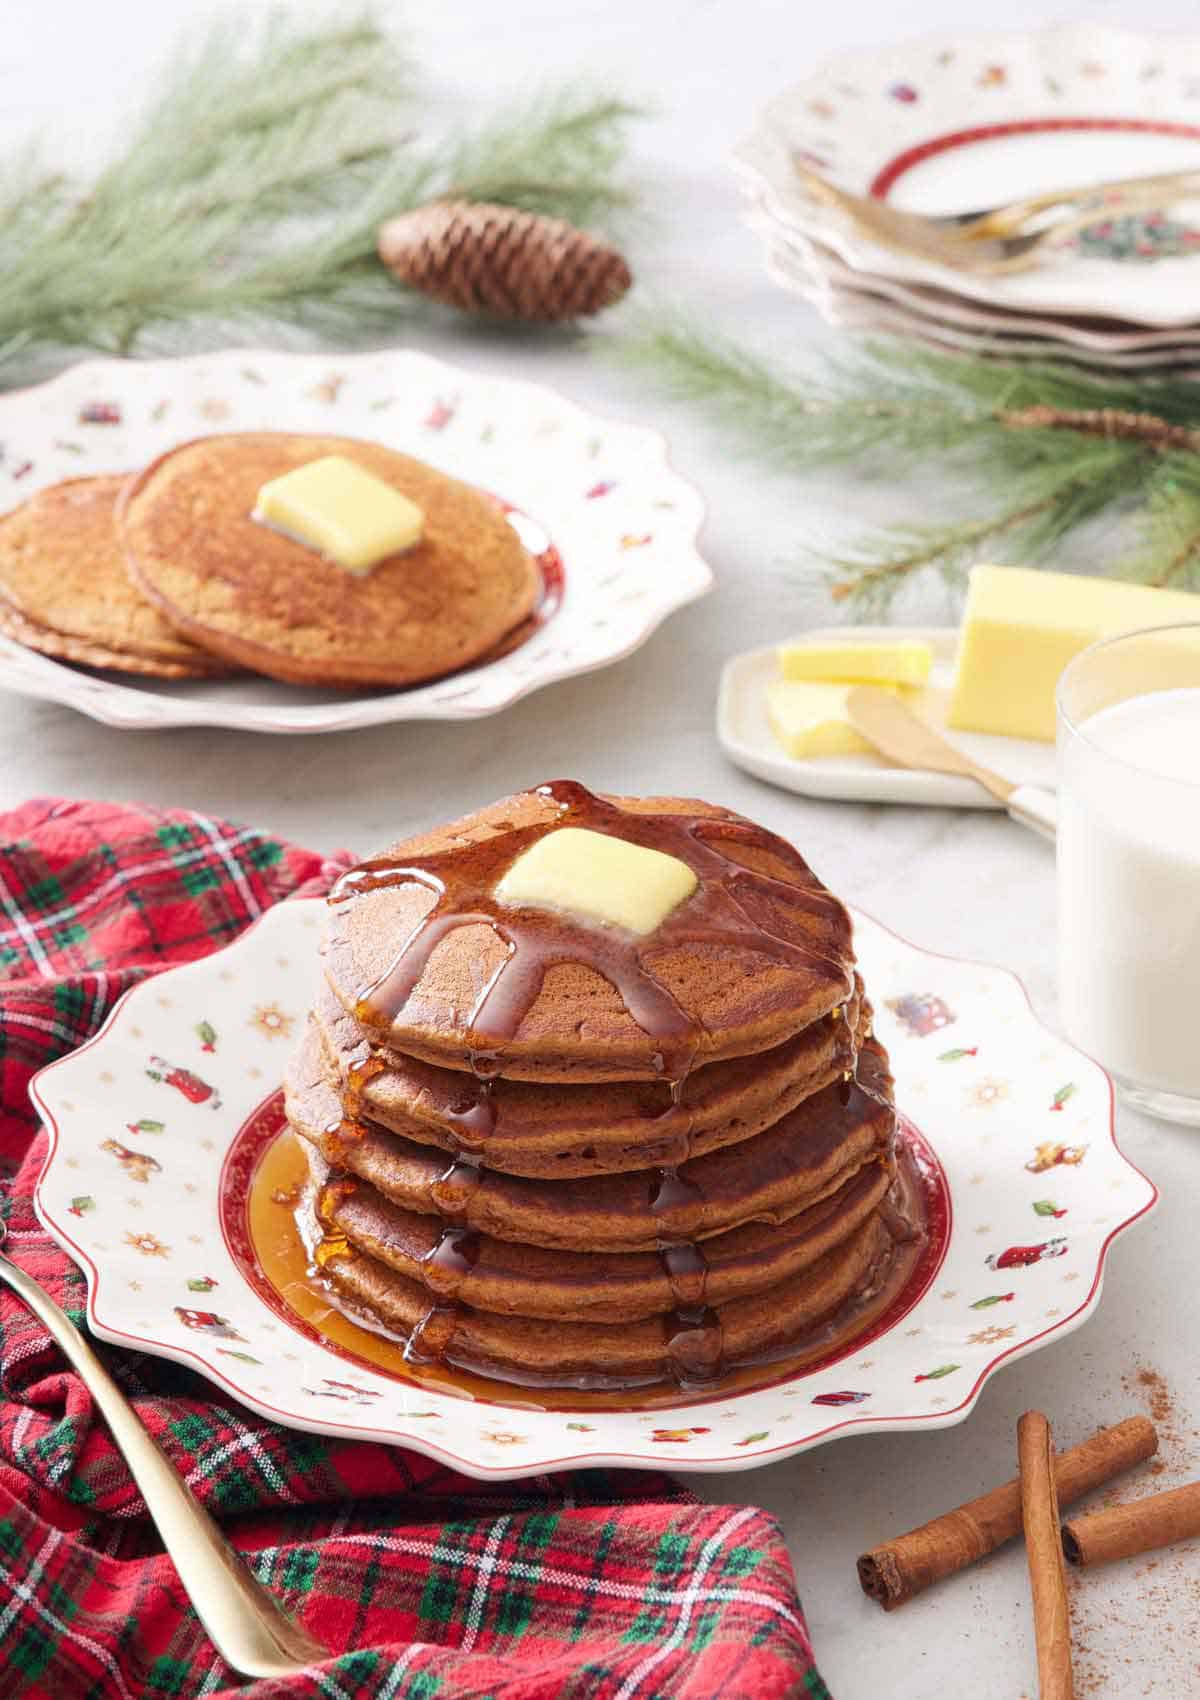 A plate with a stack of gingerbread pancakes with syrup dripping down and butter on top. More pancakes in the background.